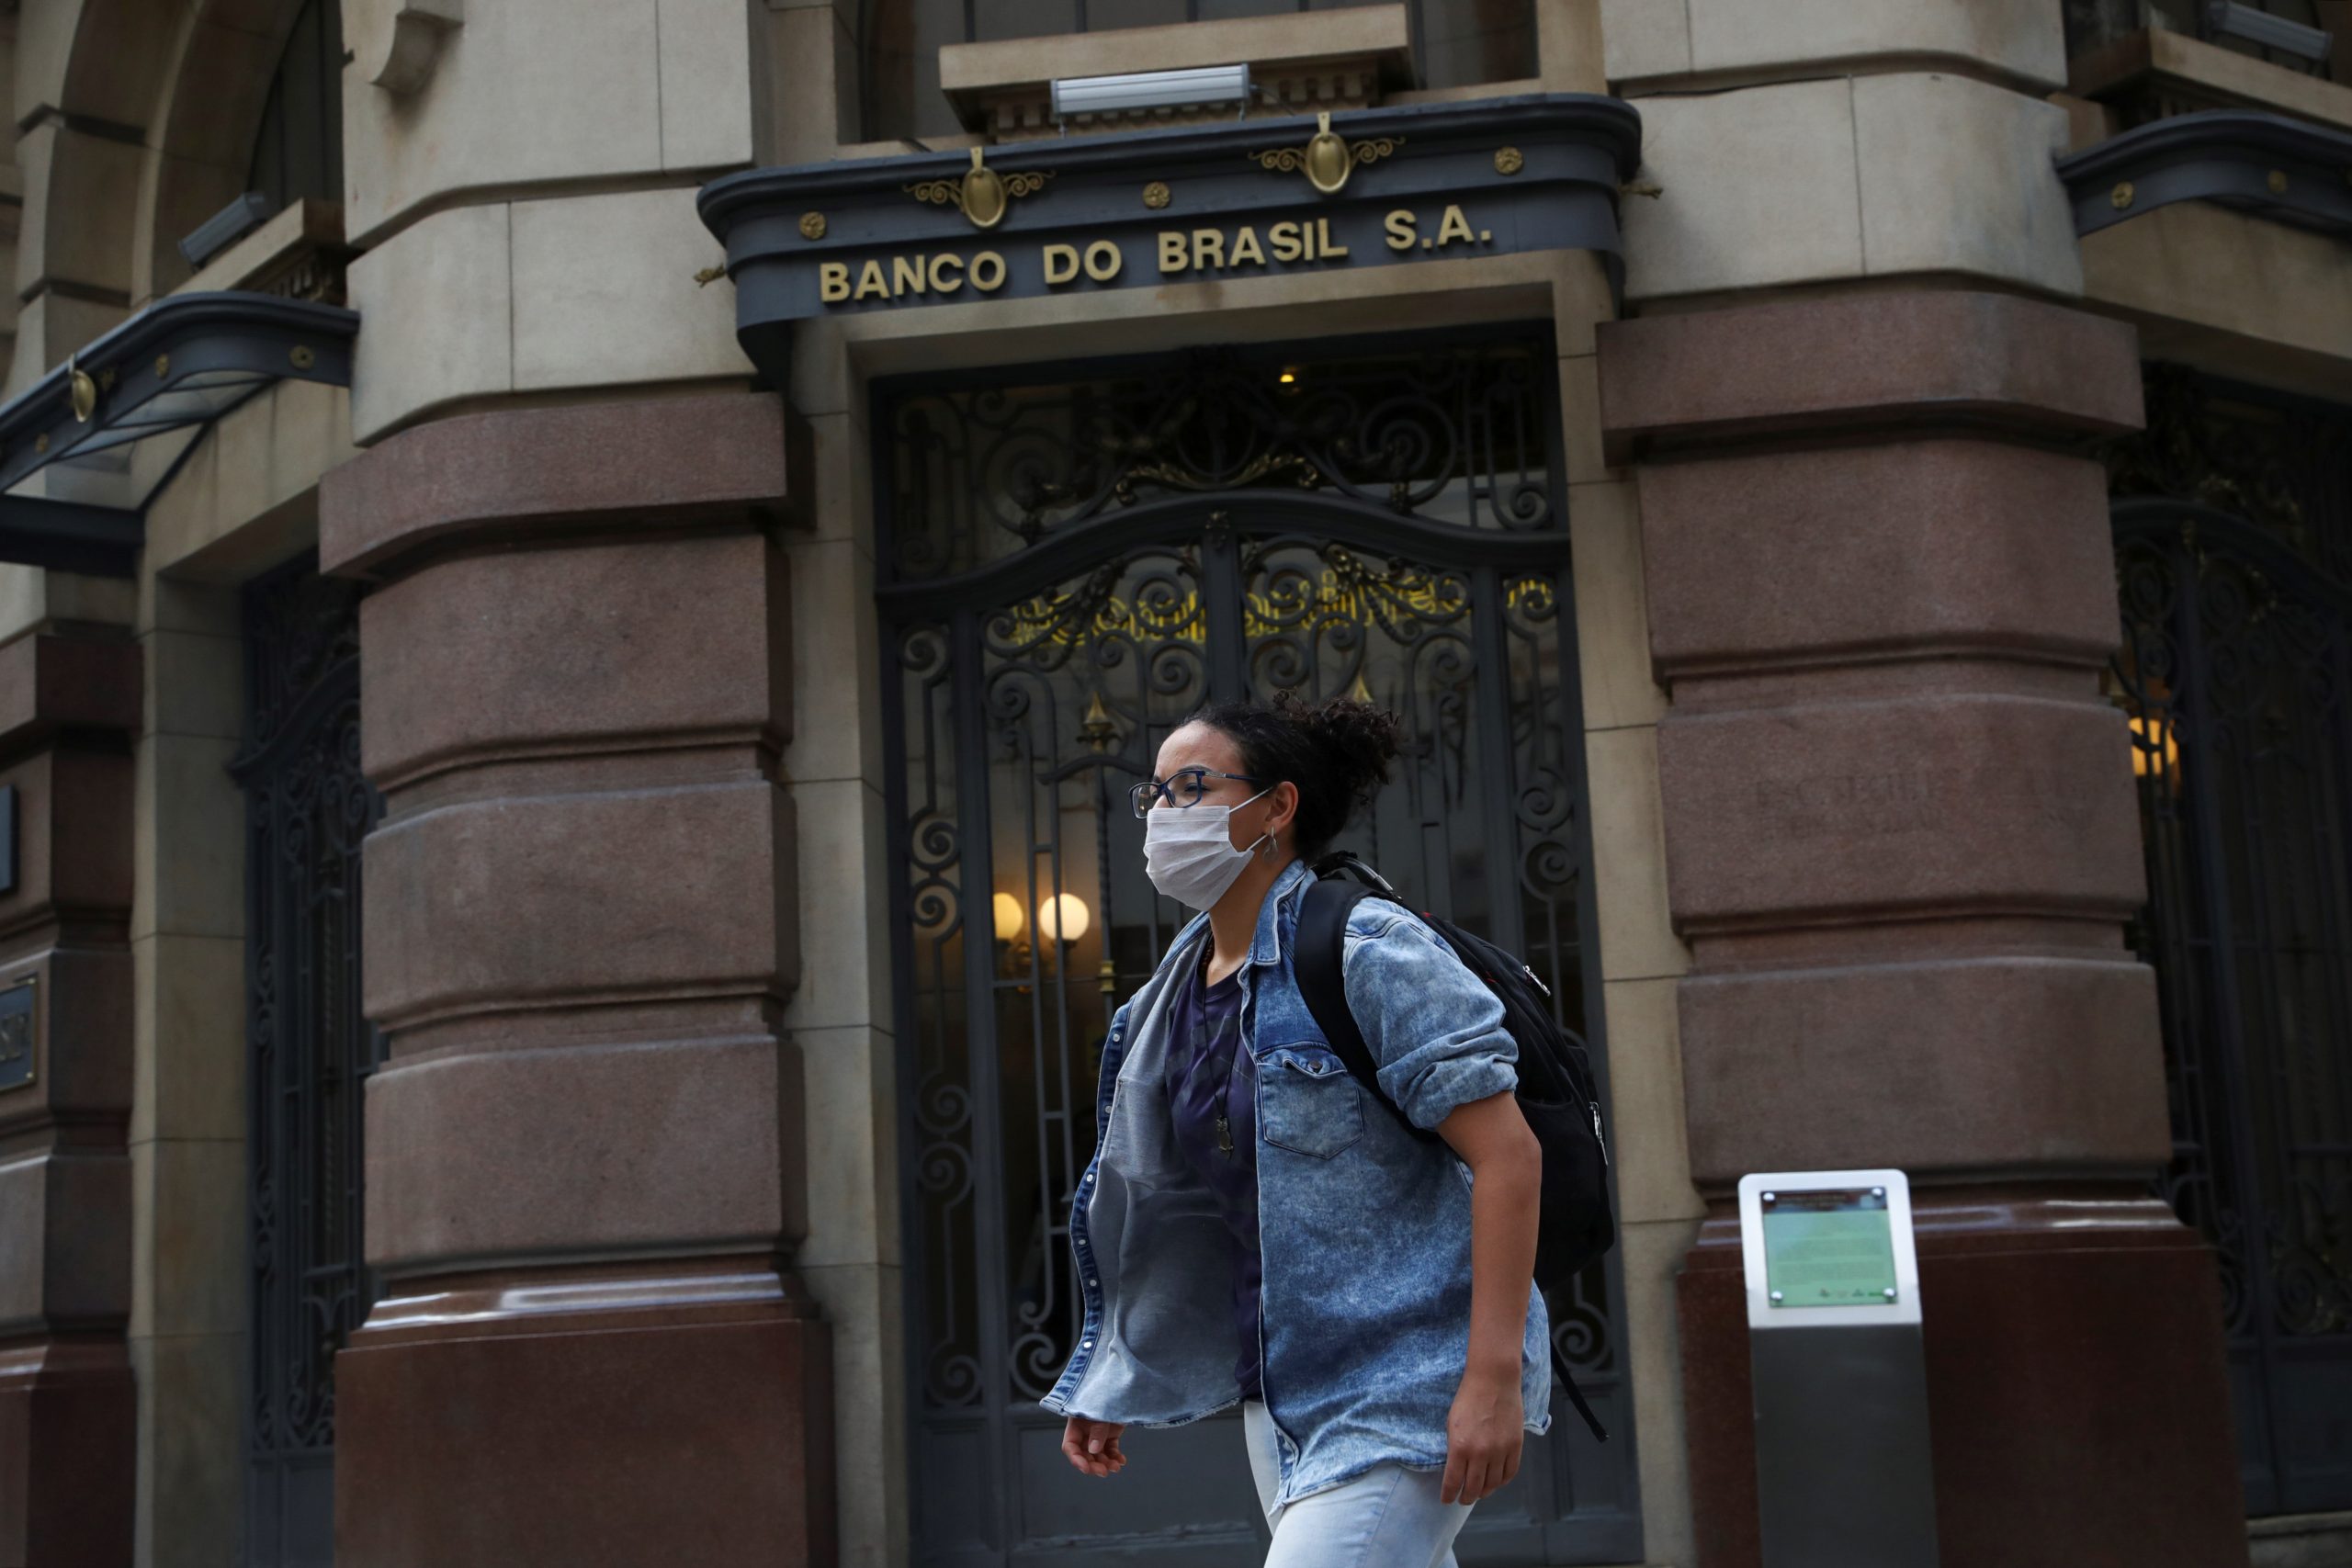 A woman wearing a protective face mask walks in front of Banco do Brasil (Bank of Brazil) cultural building during the coronavirus disease (COVID-19) outbreak in Sao Paulo